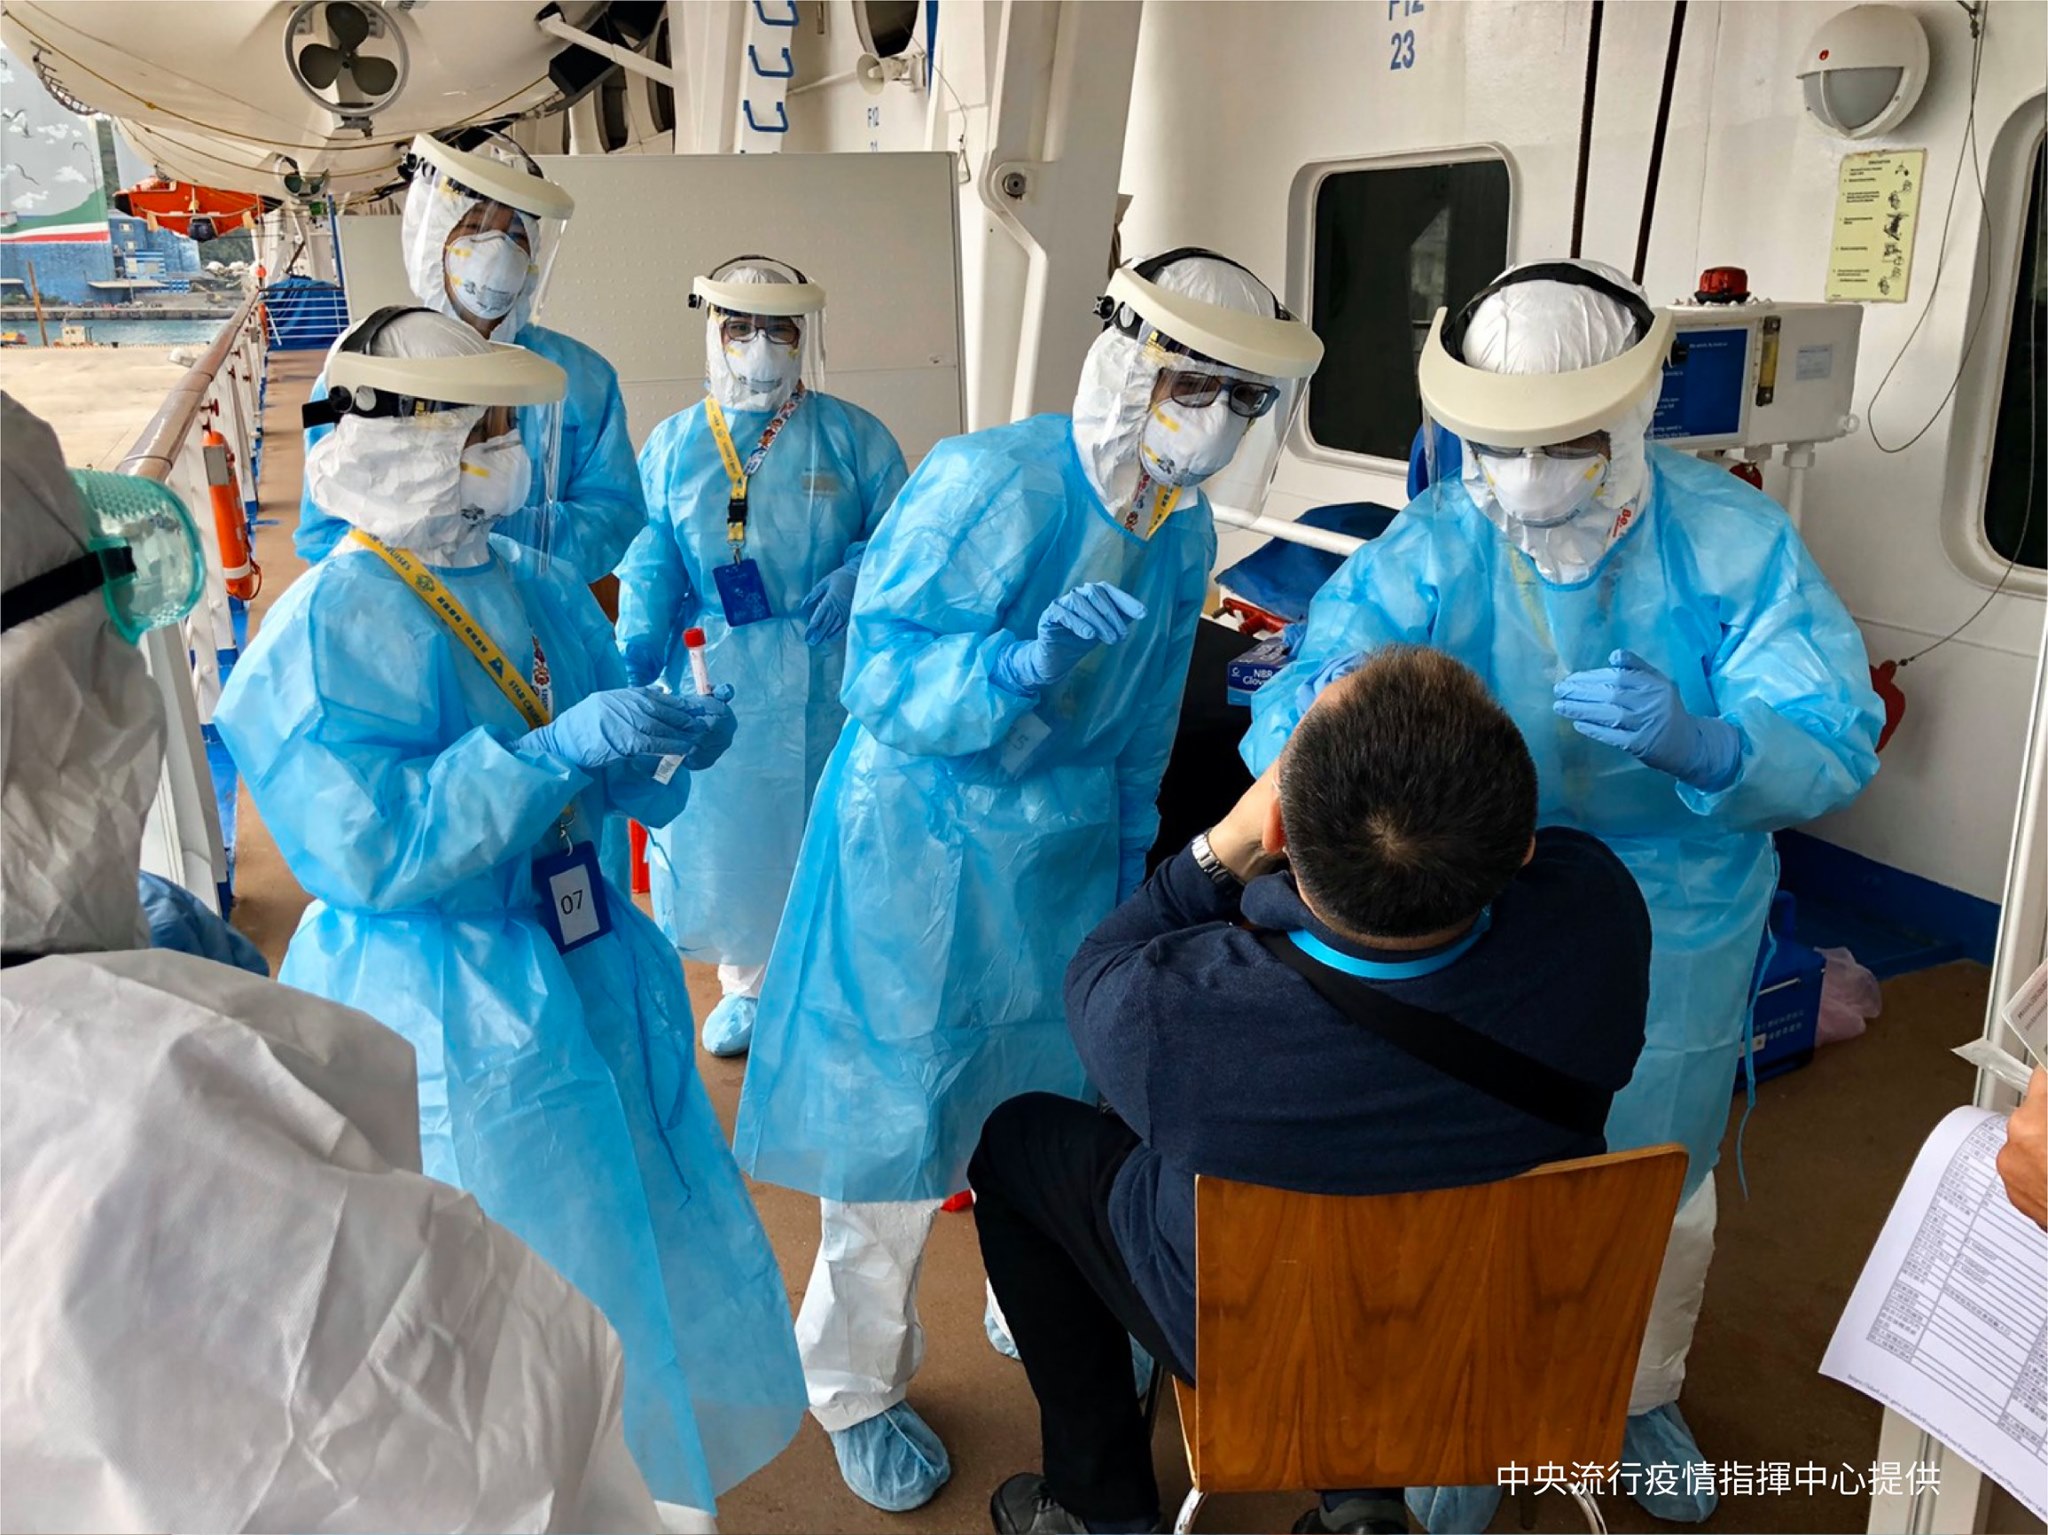 Quarantine personnel carried out quarantine procedures on passengers aboard the SuperStar Aquarius on February 8, 2020.